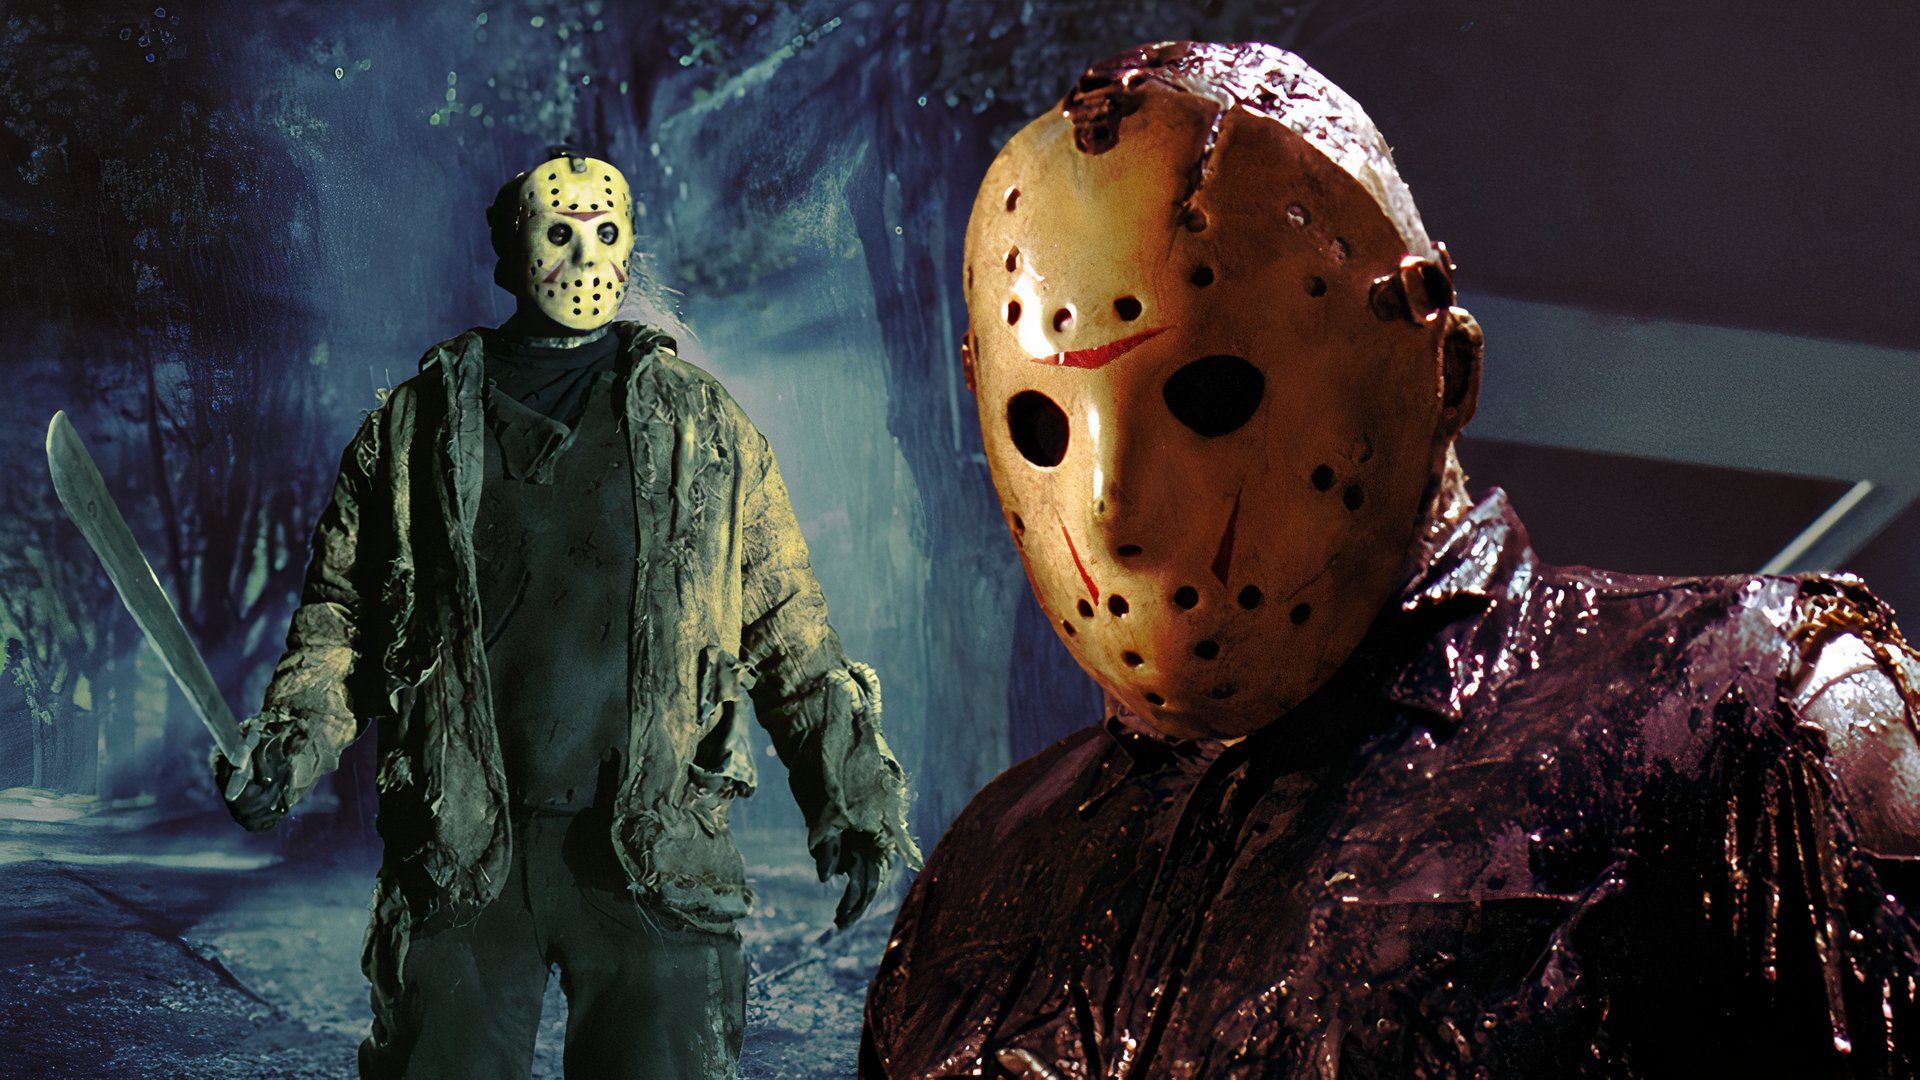 An edited image of Jason wearing his hockey mask, holding a machete in Friday the 13th movies